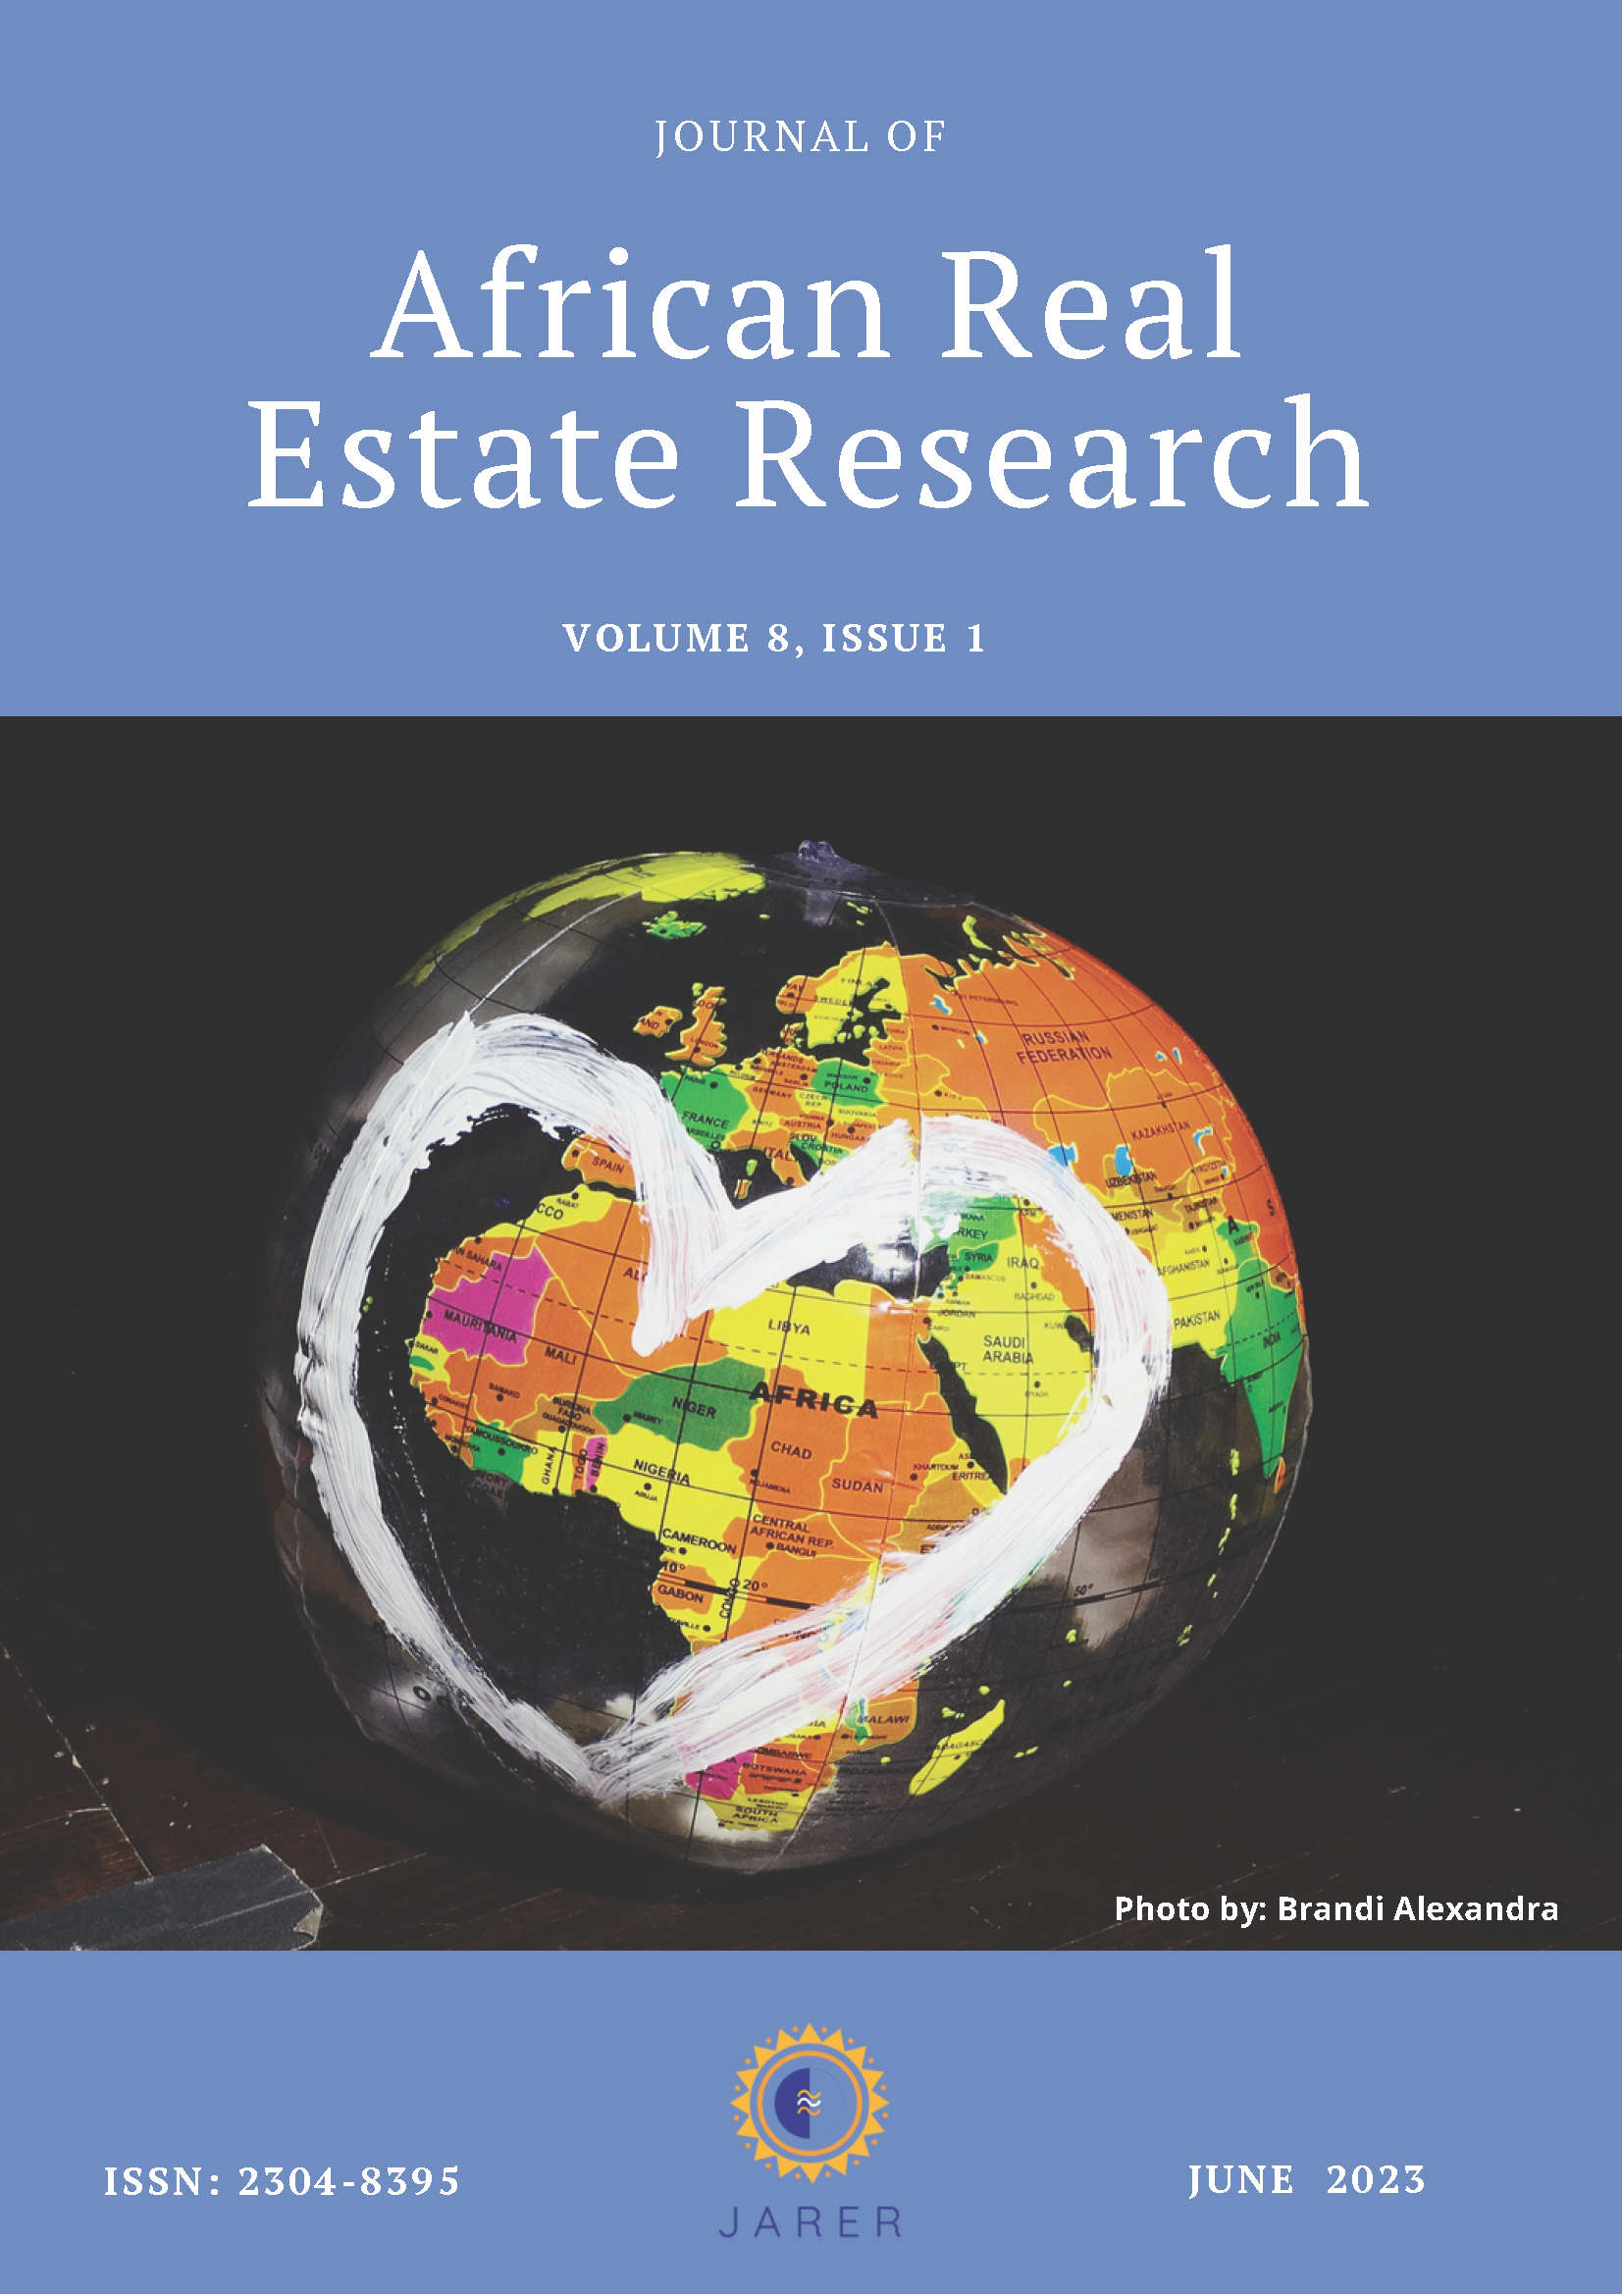 Journal of African Real Estate Research